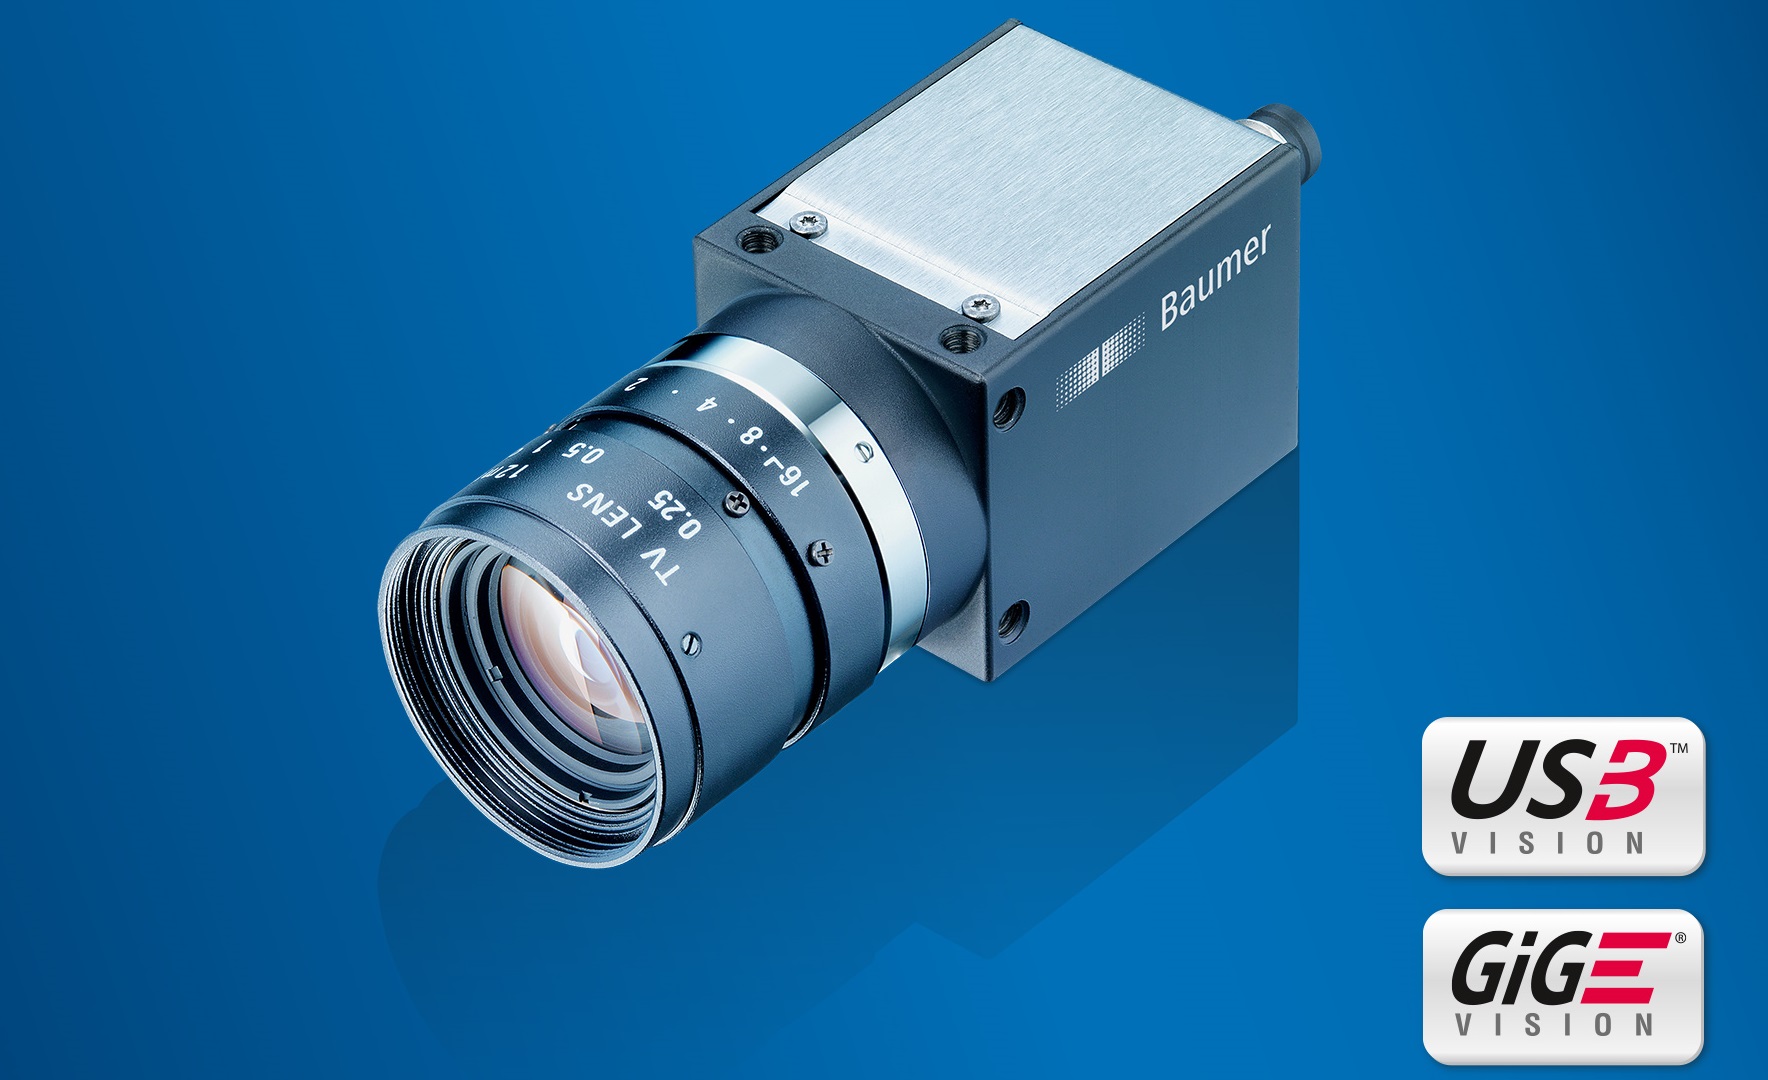 With exposure times down to 1 µs the Baumer CX cameras including second generation Sony Pregius sensors offer the shortest exposure time in the standard class of digital industrial cameras